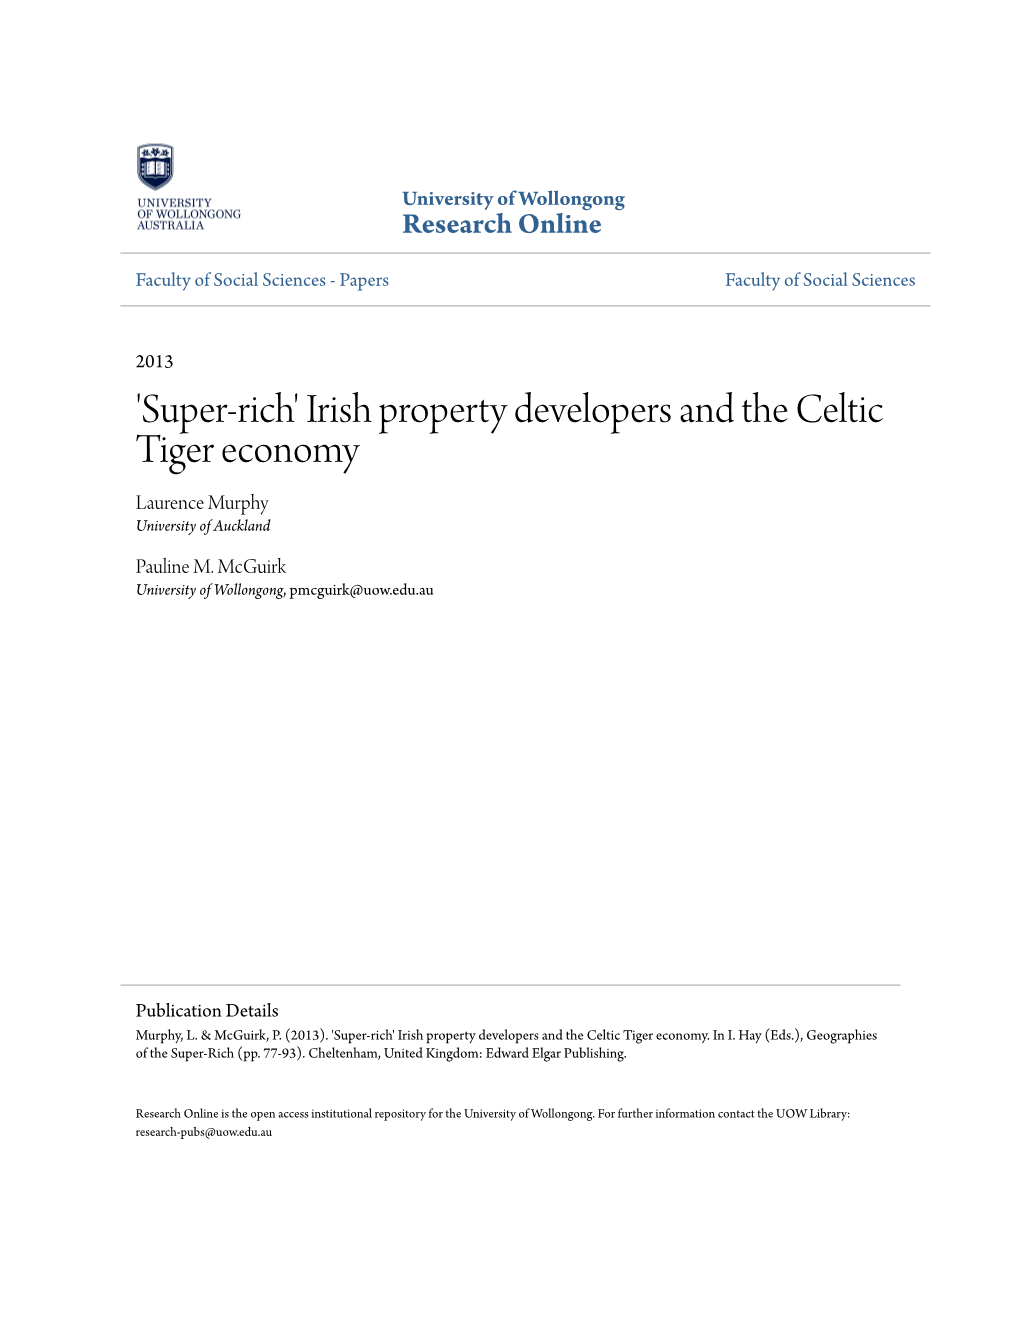 'Super-Rich' Irish Property Developers and the Celtic Tiger Economy Laurence Murphy University of Auckland